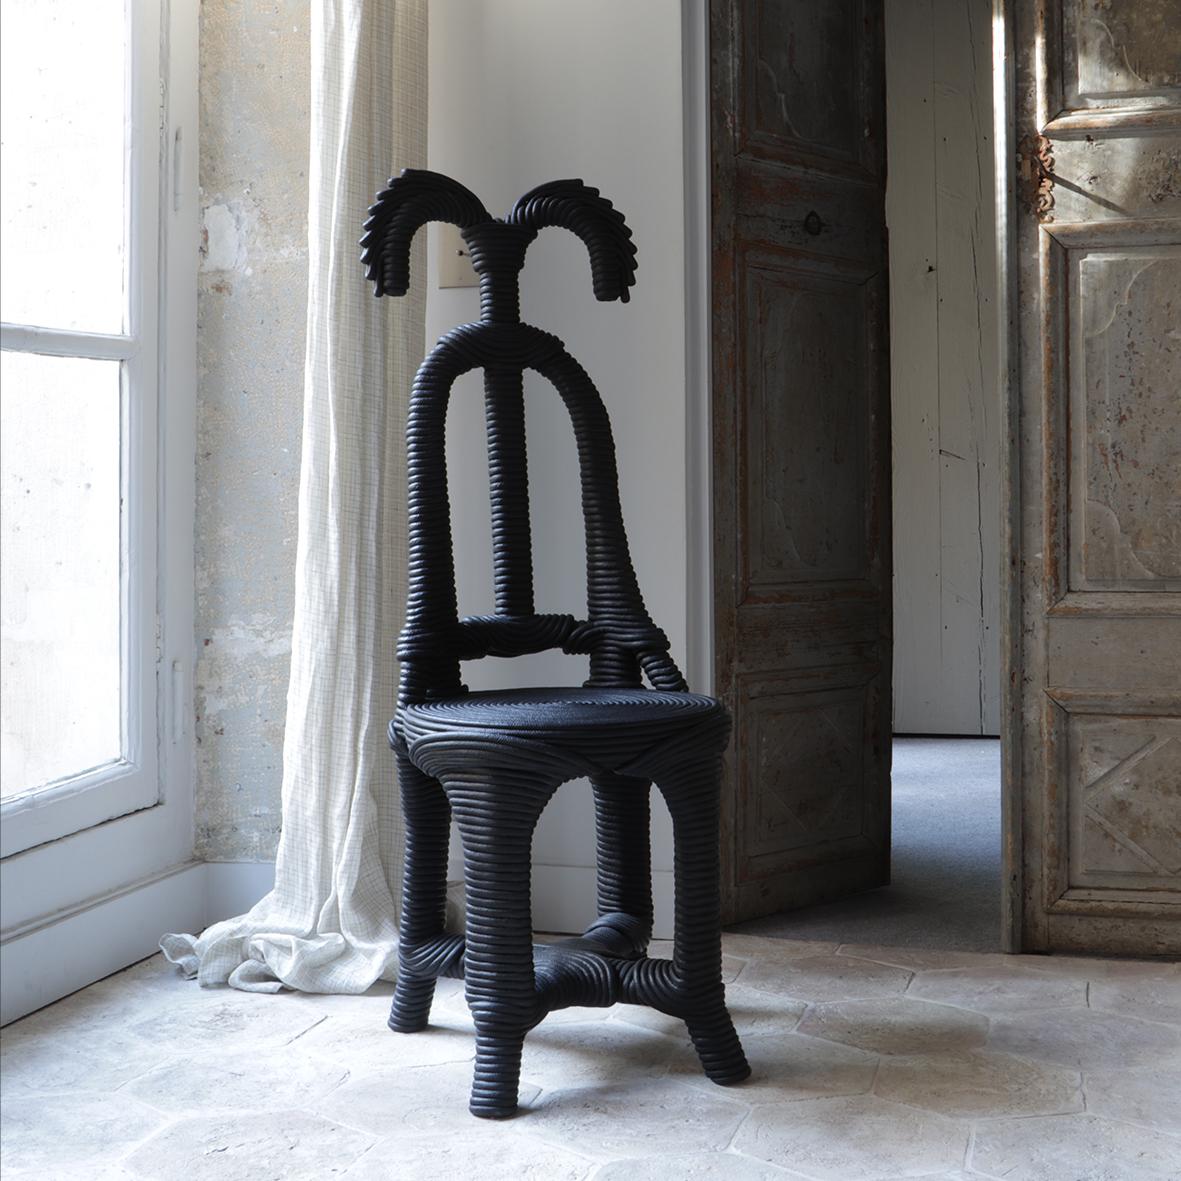 This chair is made of cotton rope painted in black and has a chestnut wood frame. It is part of the Moisson collection.

Christian Astuguevieille is a versatile artist, designer and creator. He often uses raw organic materials such as wood